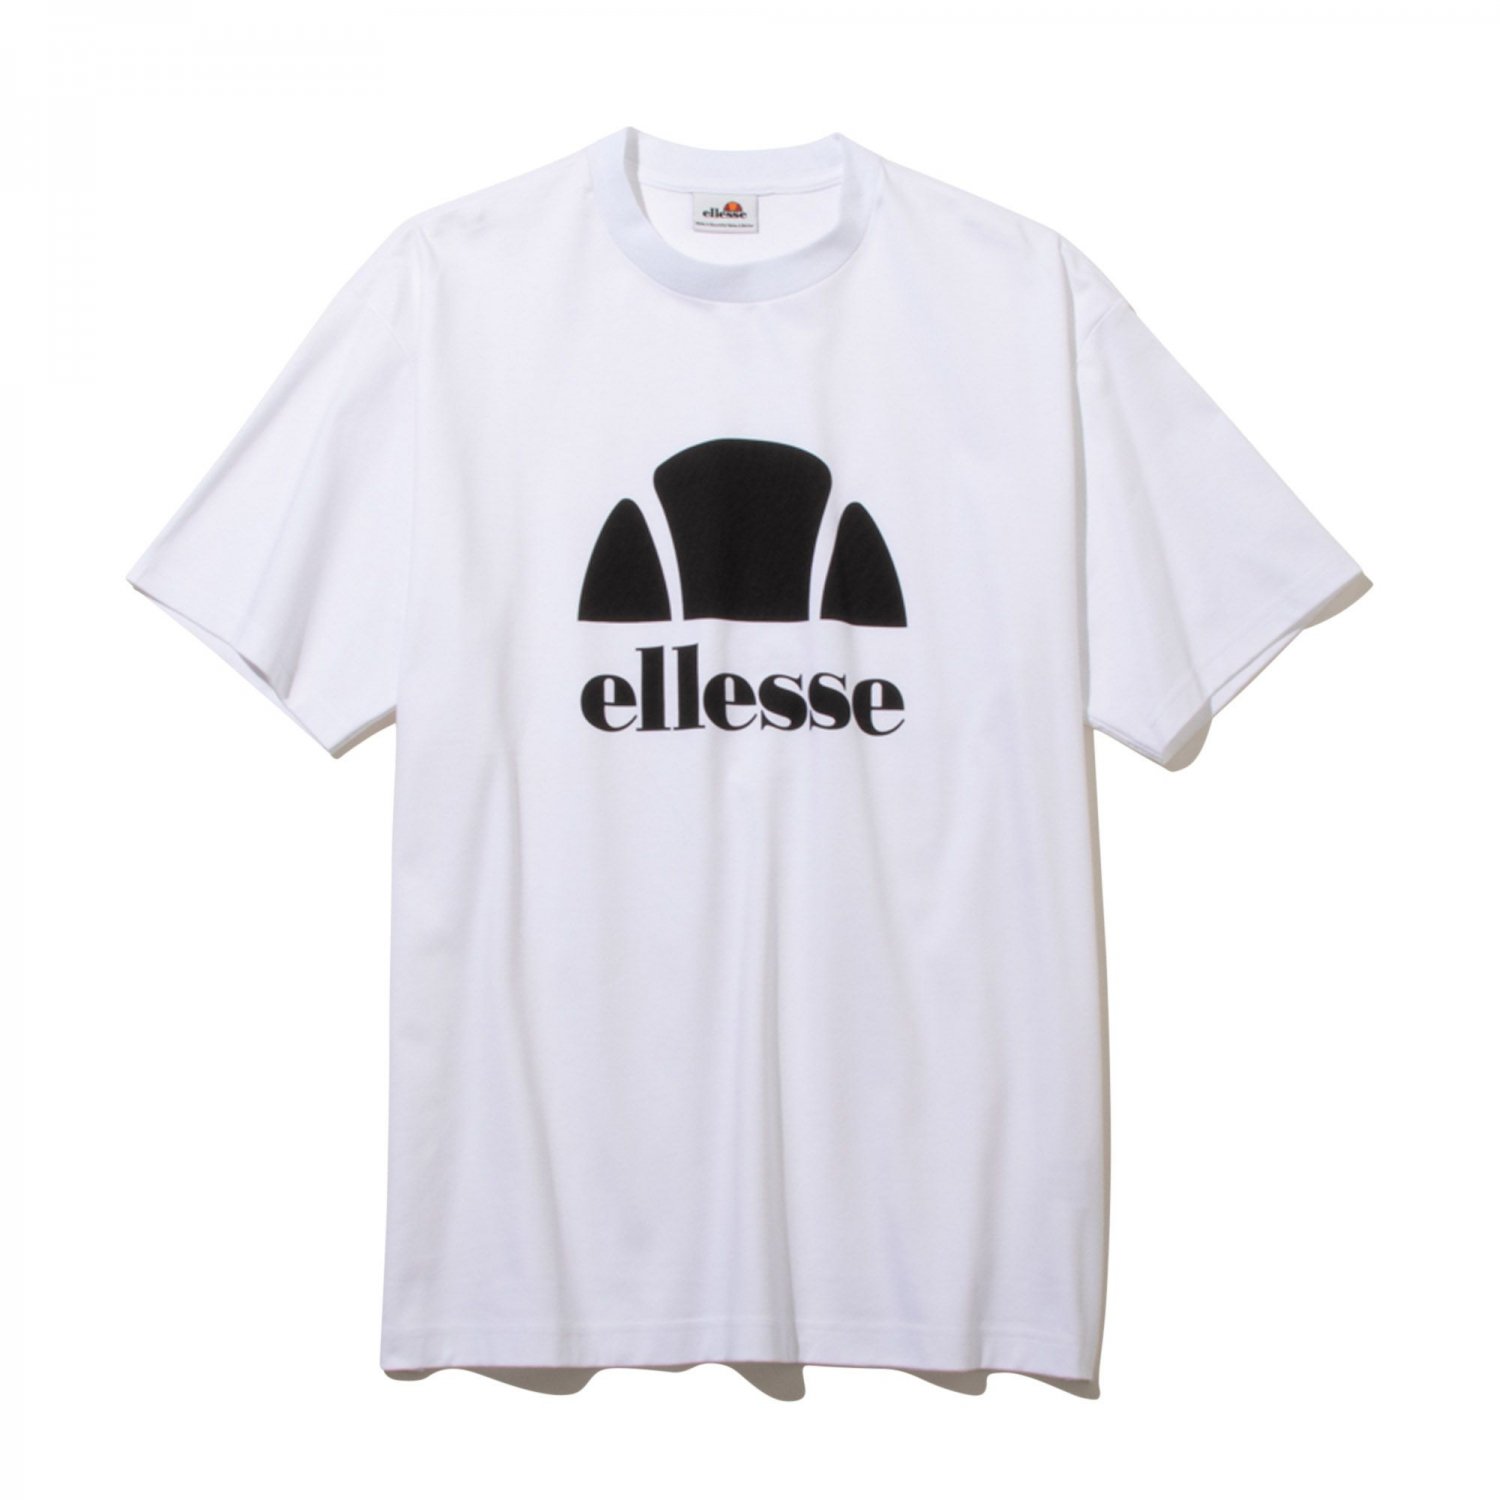 <img class='new_mark_img1' src='https://img.shop-pro.jp/img/new/icons20.gif' style='border:none;display:inline;margin:0px;padding:0px;width:auto;' />ellesse / S/S ellesse Tee